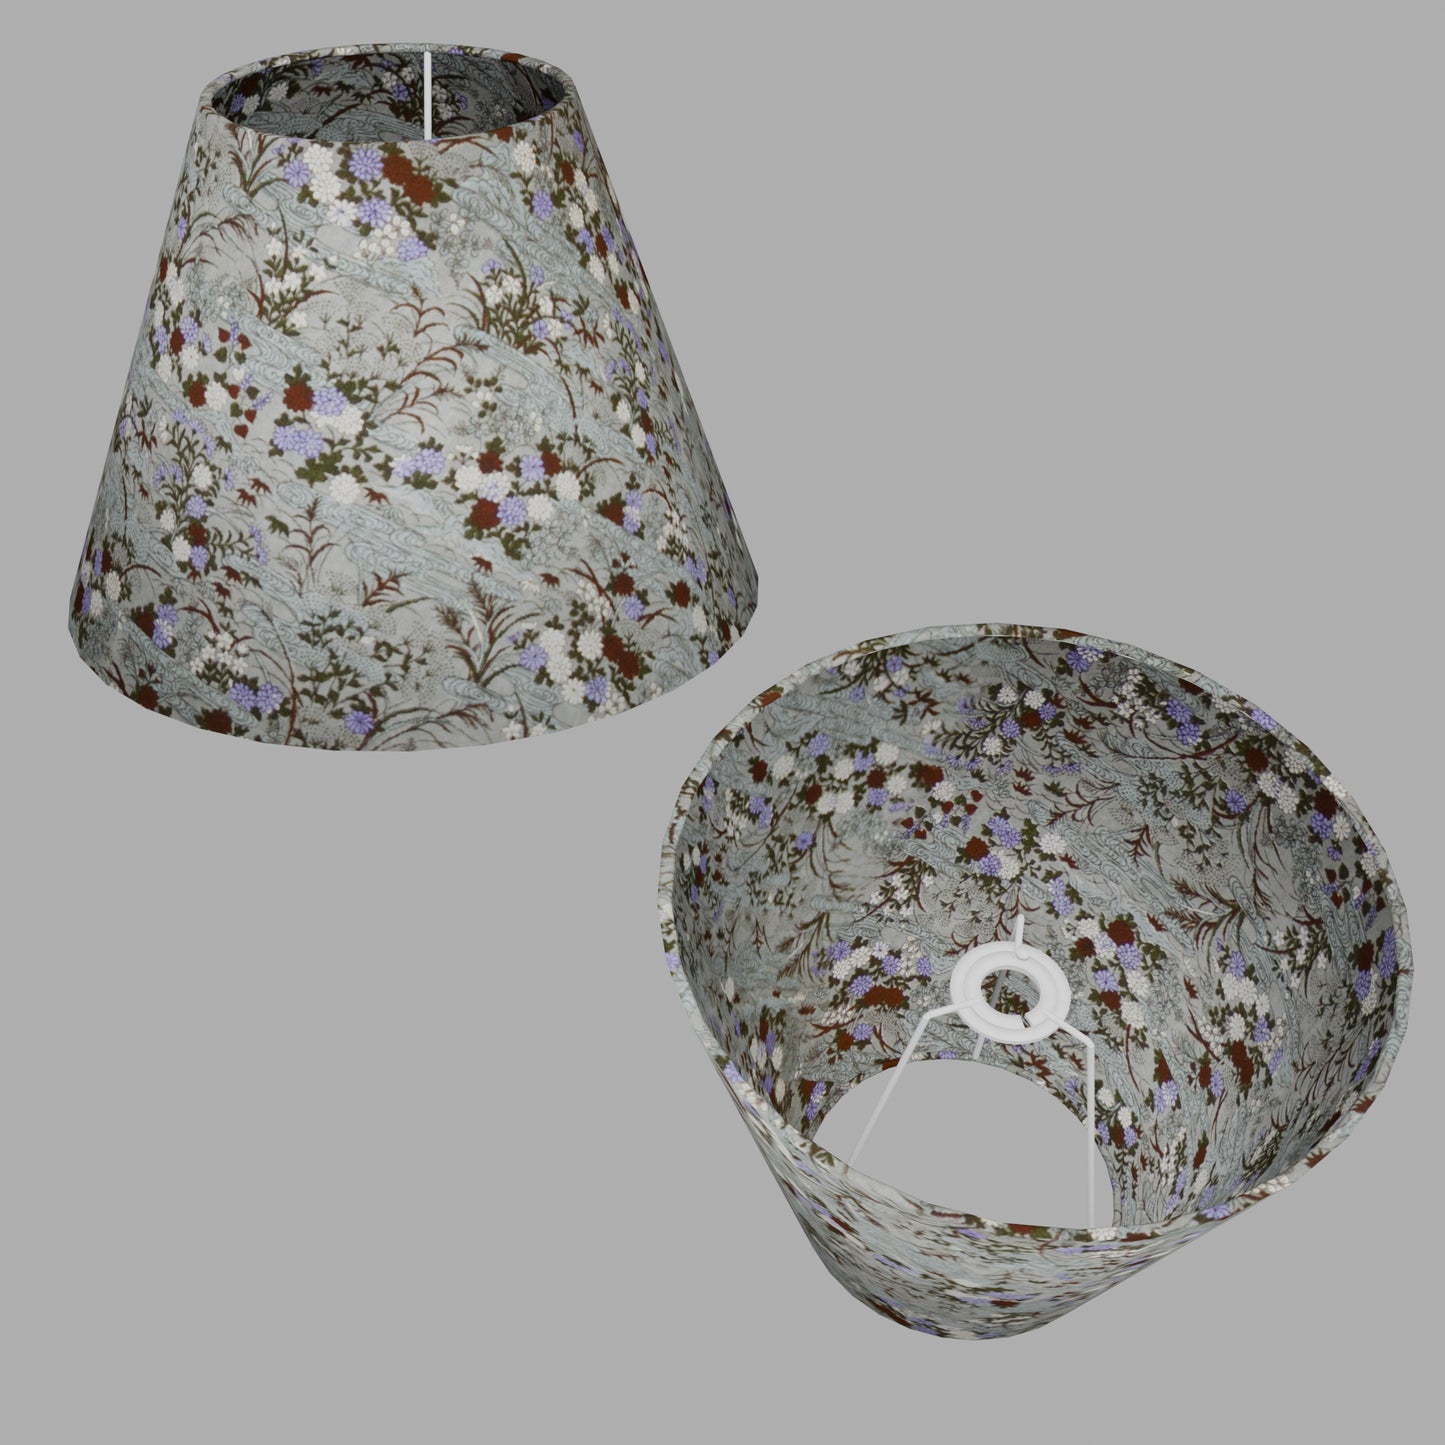 Conical Lamp Shade W08 ~ Lily Pond, 15cm(top) x 30cm(bottom) x 22cm(height)